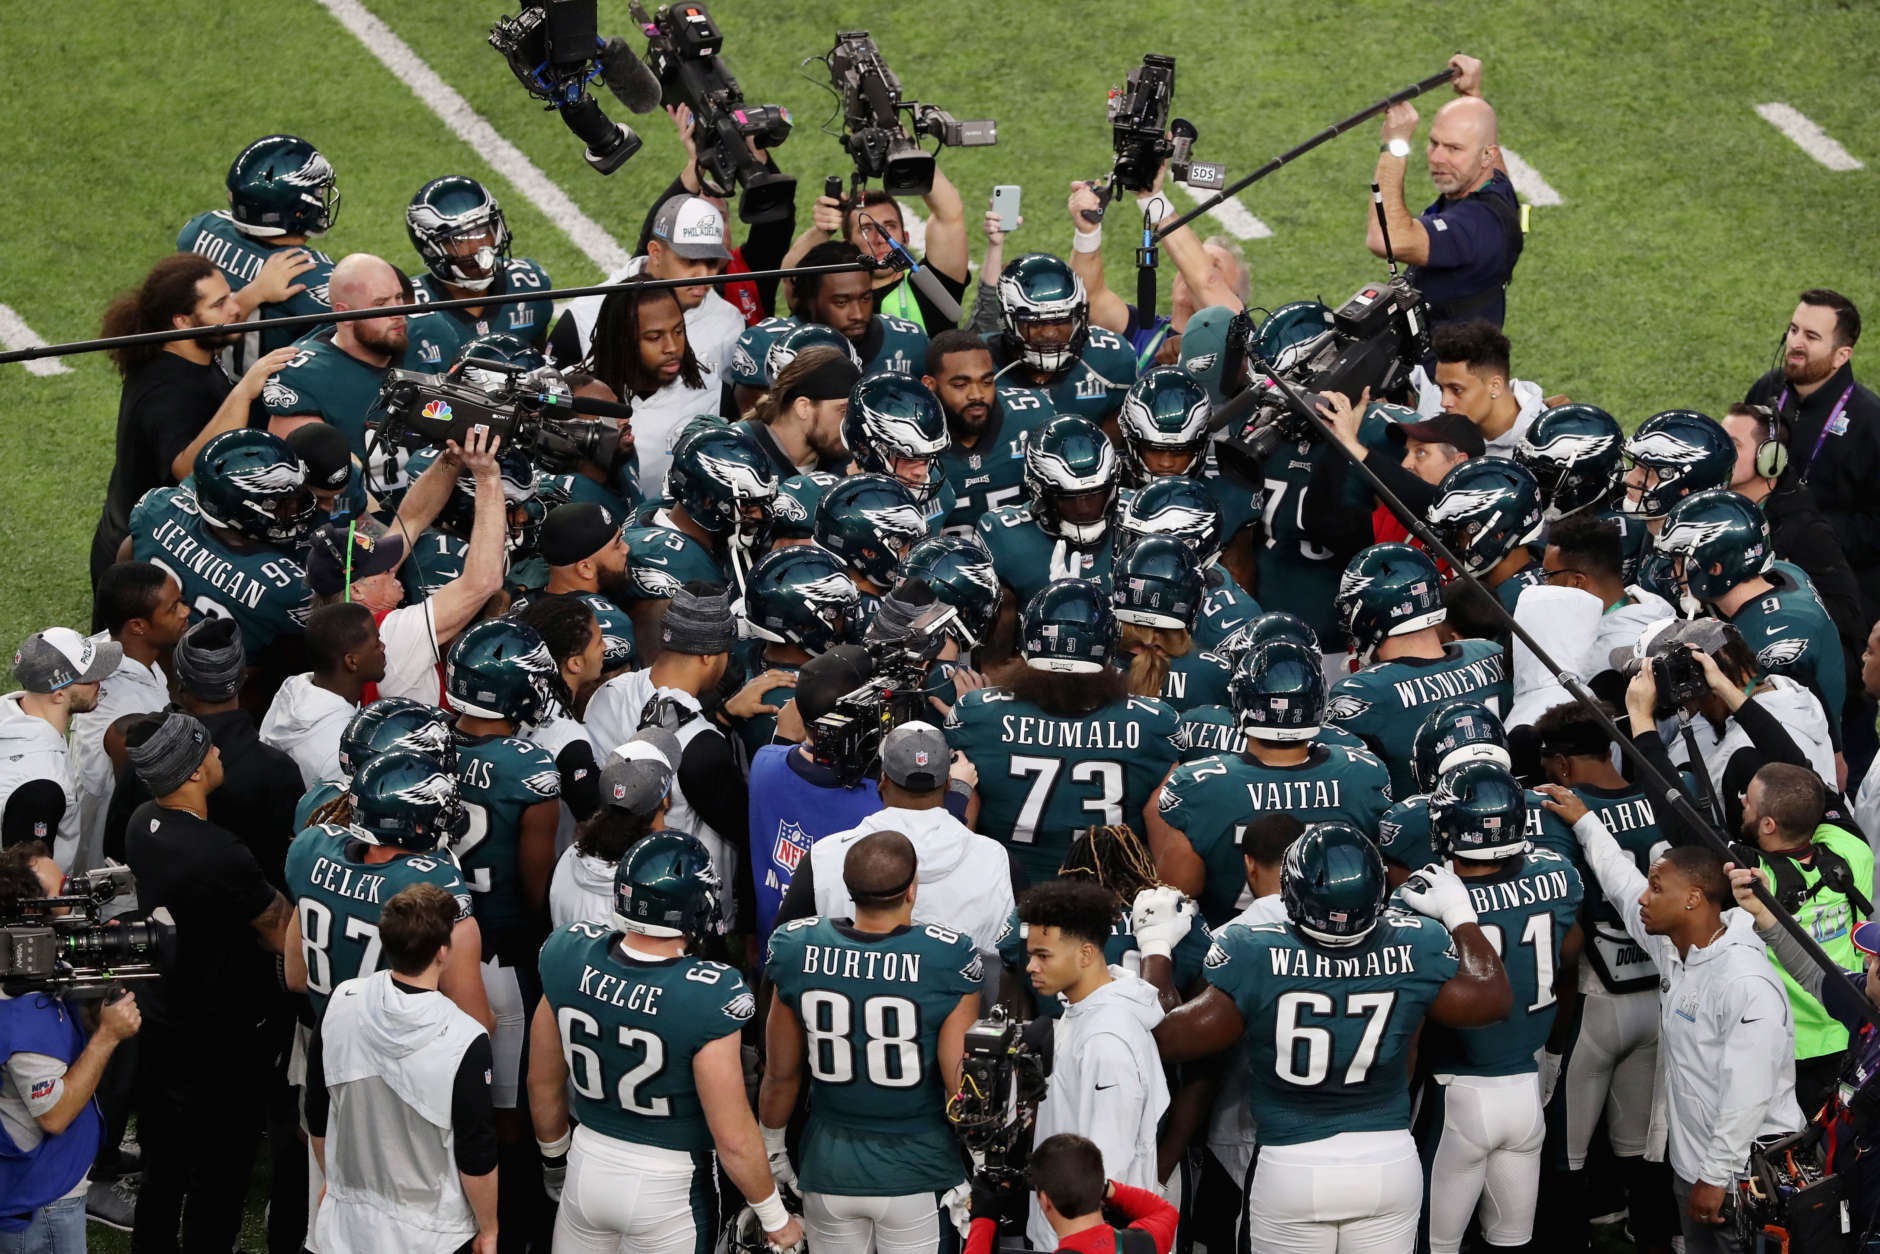 MINNEAPOLIS, MN - FEBRUARY 04:  The Philadelphia Eagles huddle during warm-ups prior to Super Bowl LII against the New England Patriots at U.S. Bank Stadium on February 4, 2018 in Minneapolis, Minnesota.  (Photo by Christian Petersen/Getty Images)